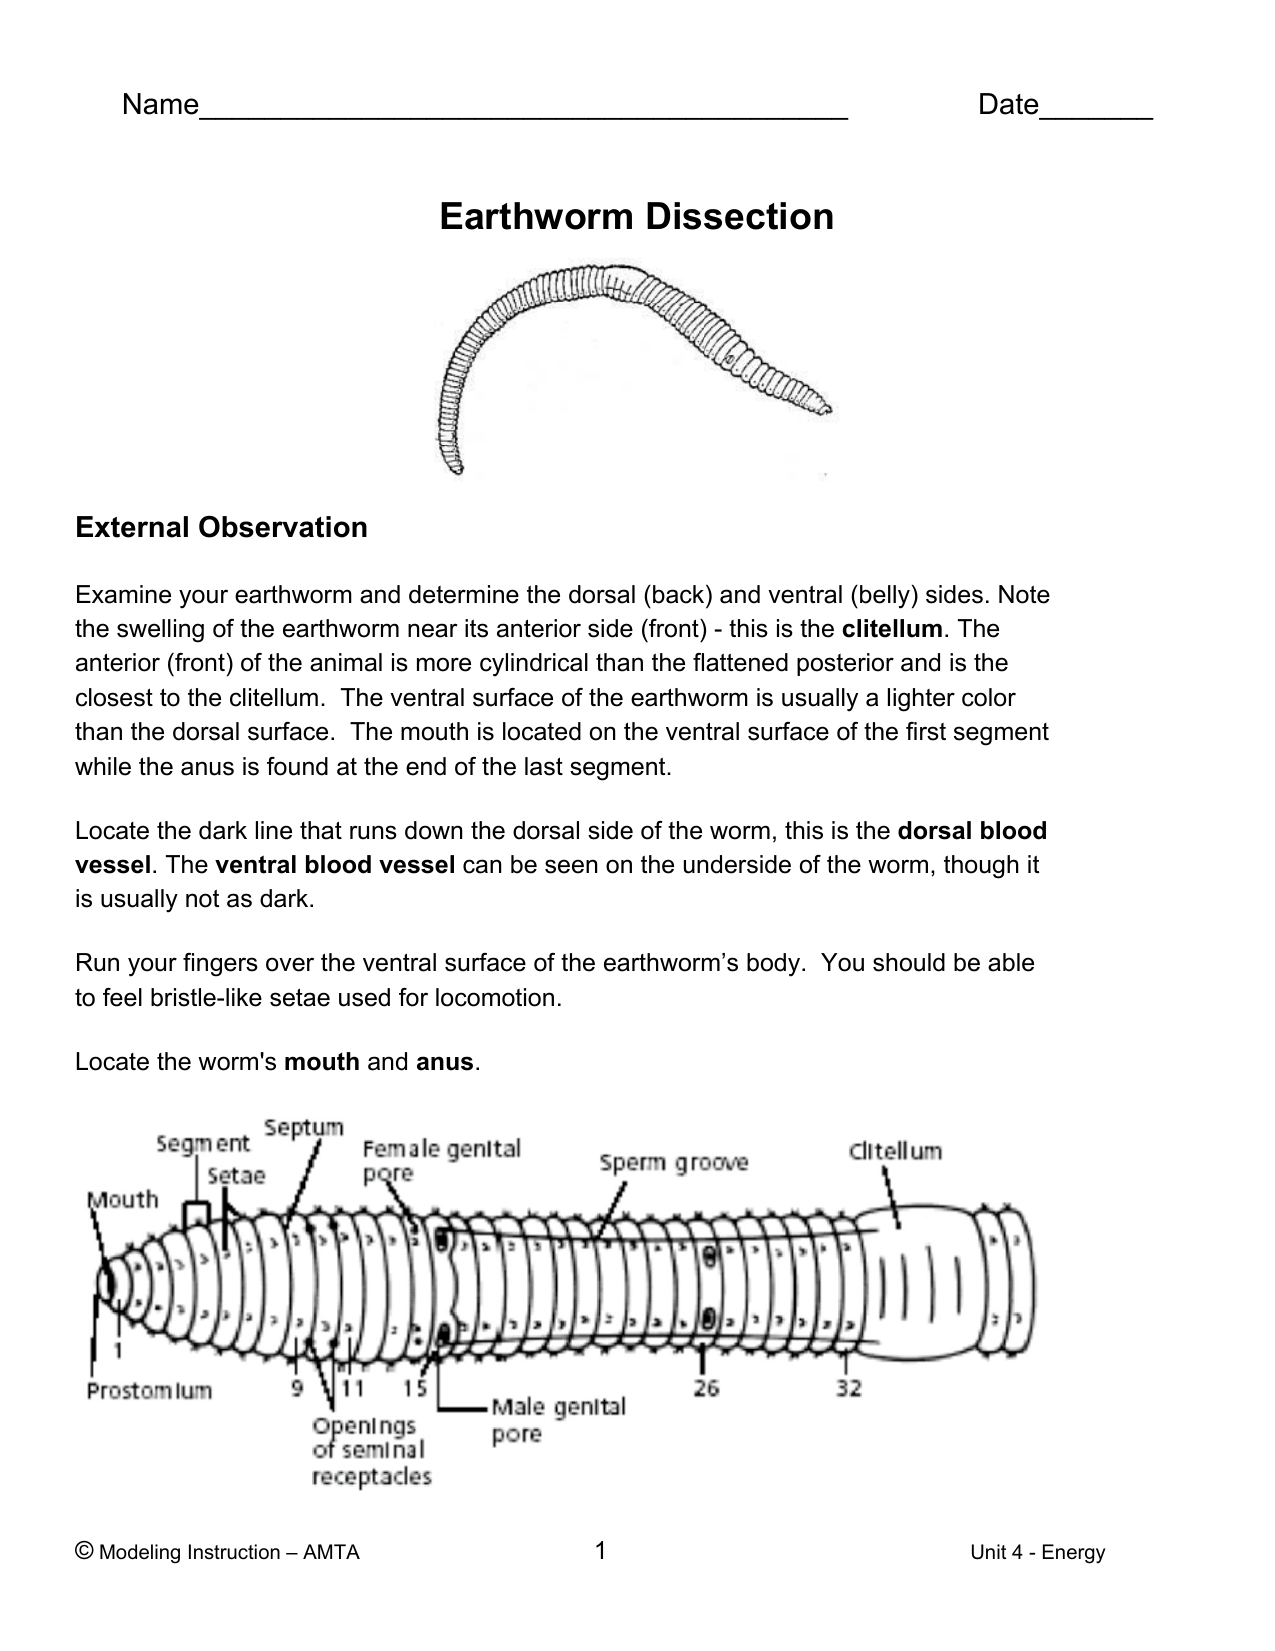 Frey Scientific 597003 Mini-Guide to Earthworm Dissection 